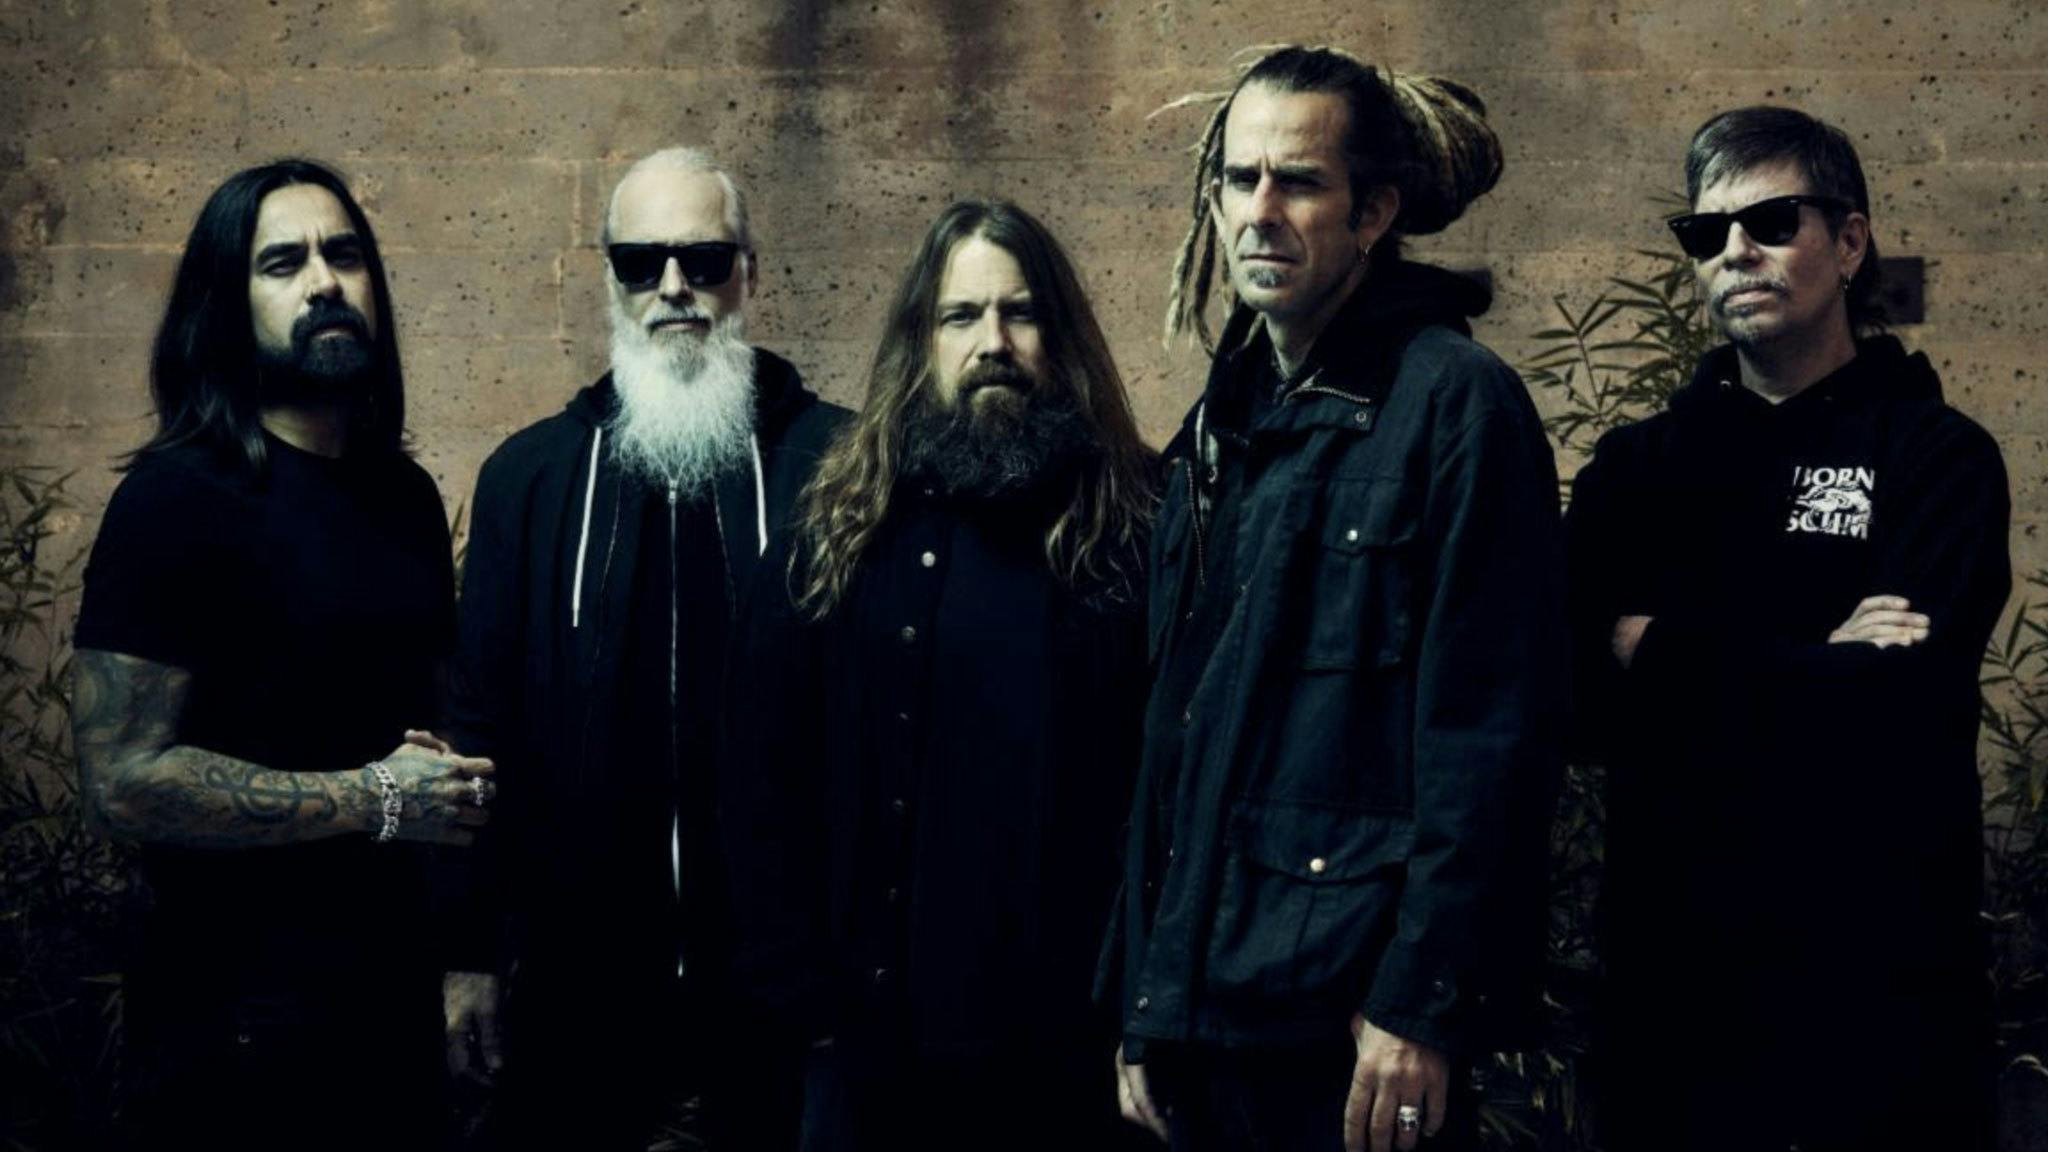 Here’s Lamb Of God’s setlist from their first UK tour in… Kerrang!